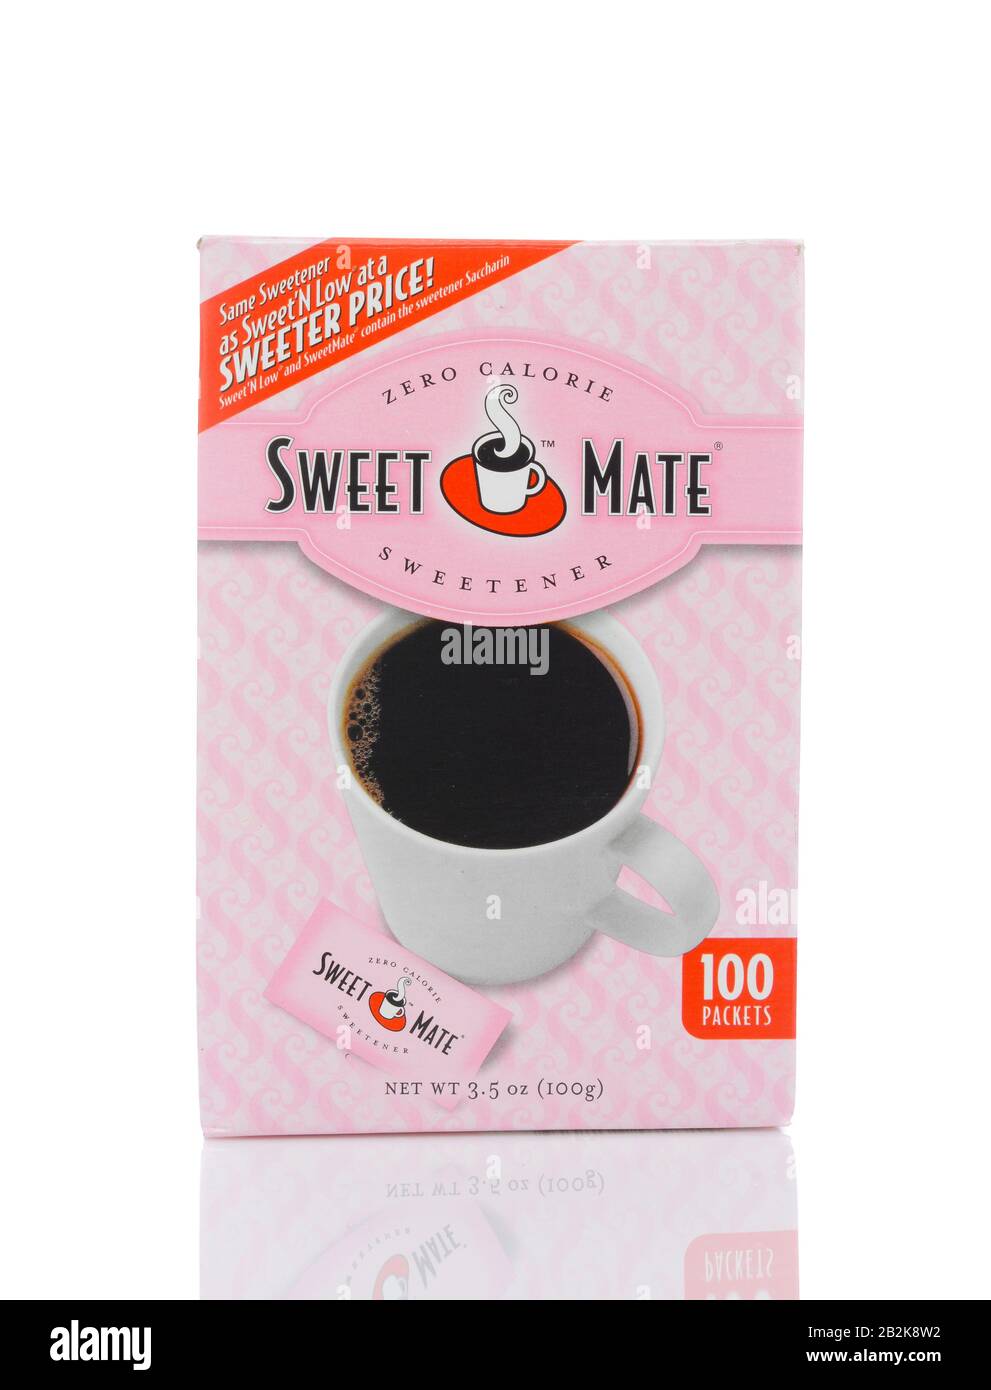 IRVINE, CALIFORNIA - MAY 22, 2019:  A 100 count package of Sweet Mate Zero Calorie Sweetener. Stock Photo